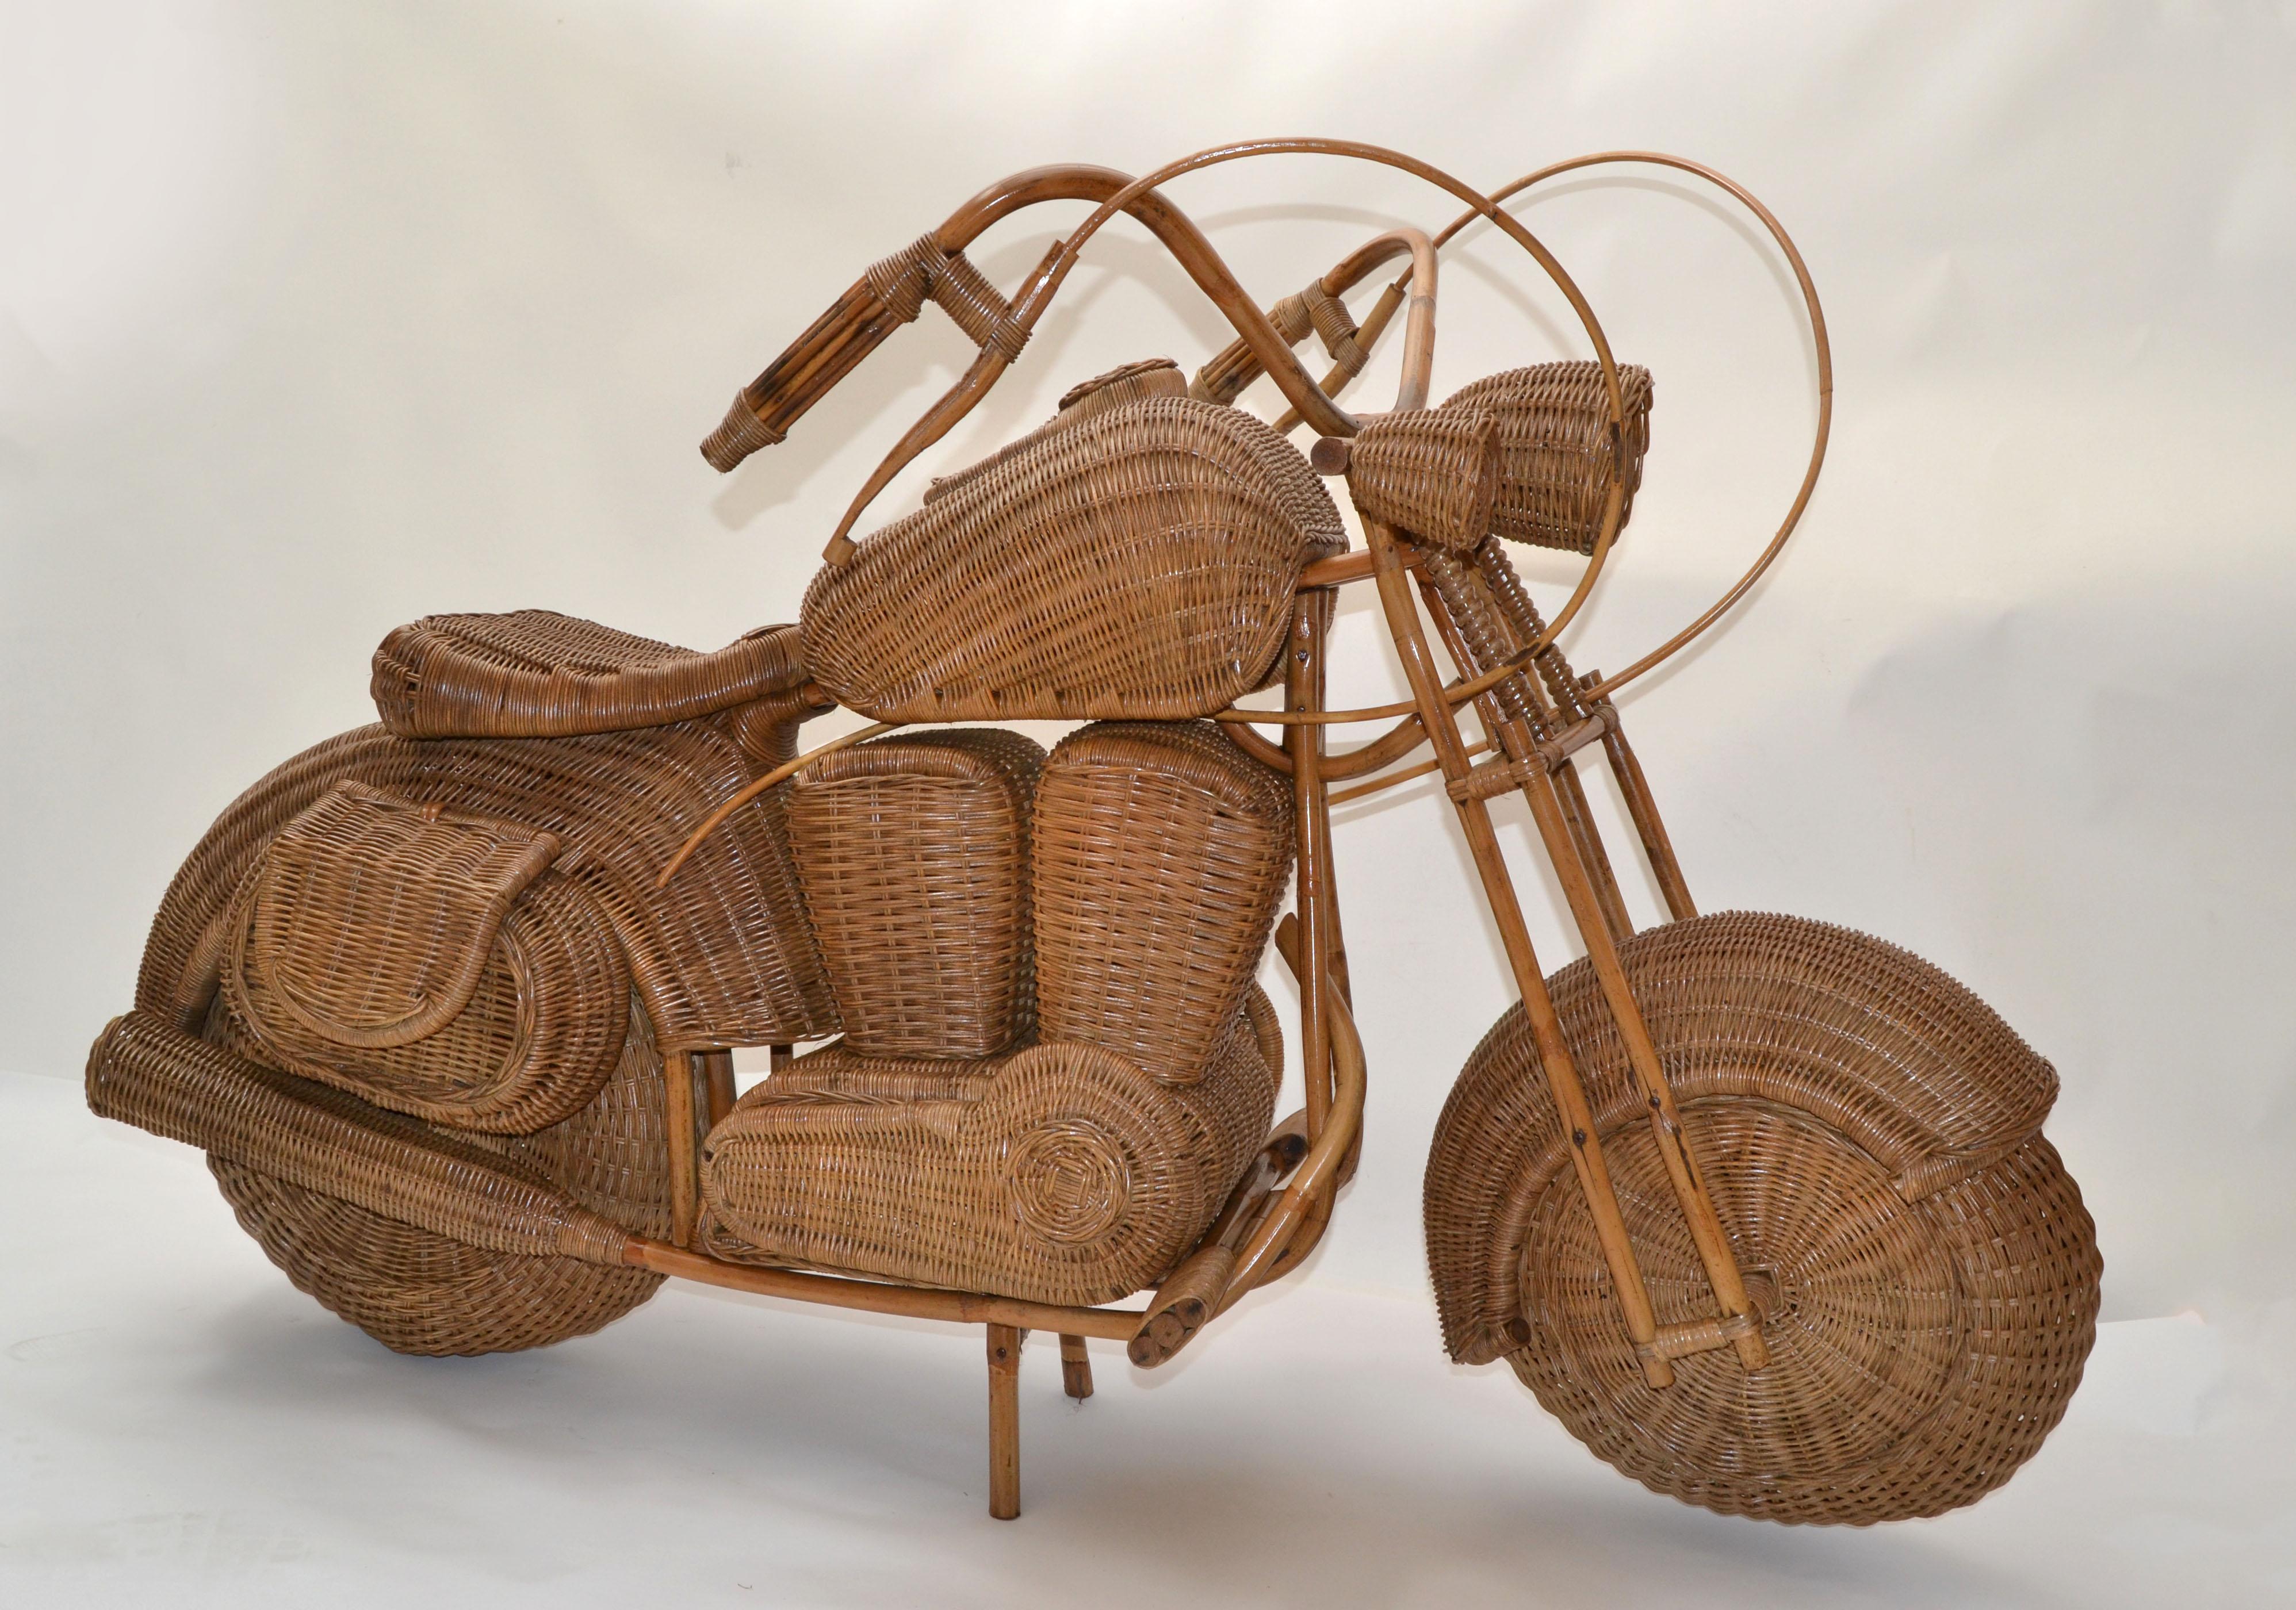 Life Size Harley Davidson handcrafted and handwoven sculptural motorcycle Design by Tom Dixon For Habitat stores Display in the 1980s. 
Handmade of rattan, cane and bamboo. Note the attention to the details all around on storage baskets,